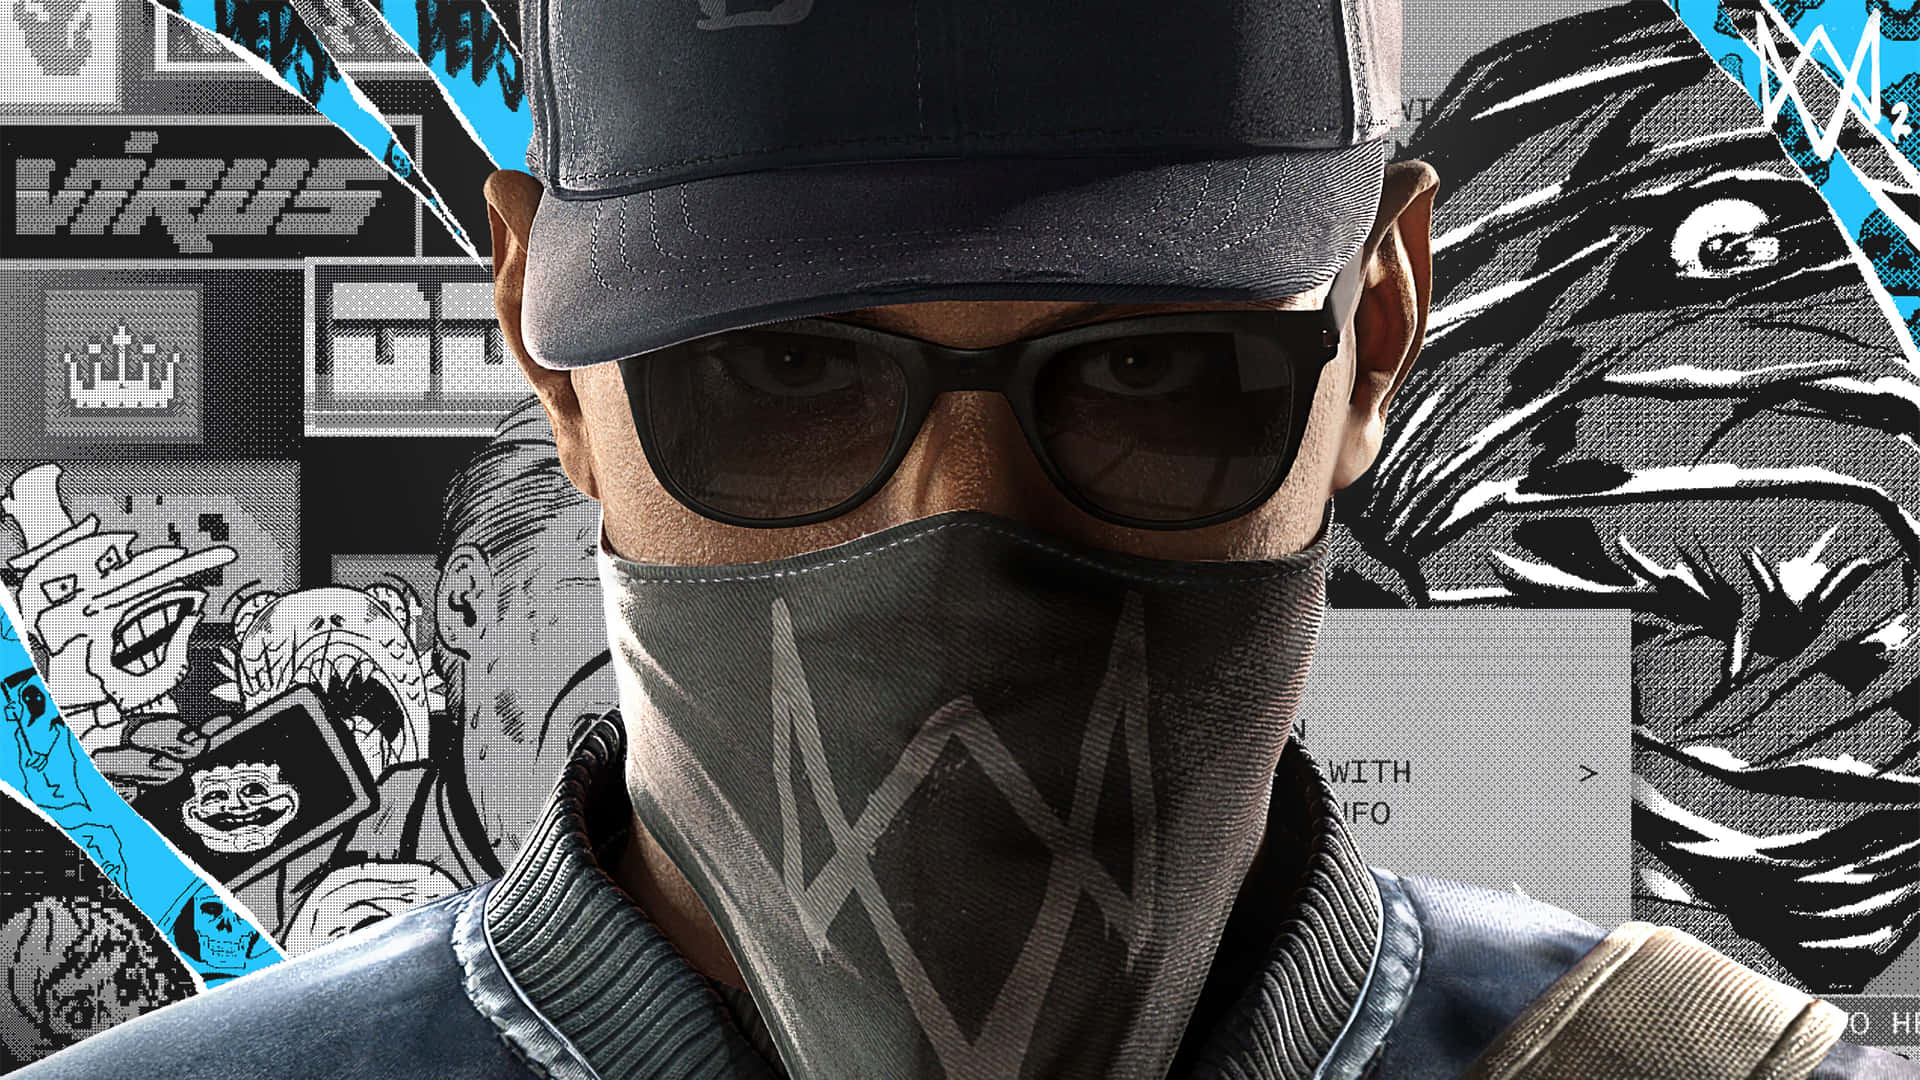 "Explore your way through an open world as hacker Marcus Holloway with Watch Dogs 2 4k" Wallpaper